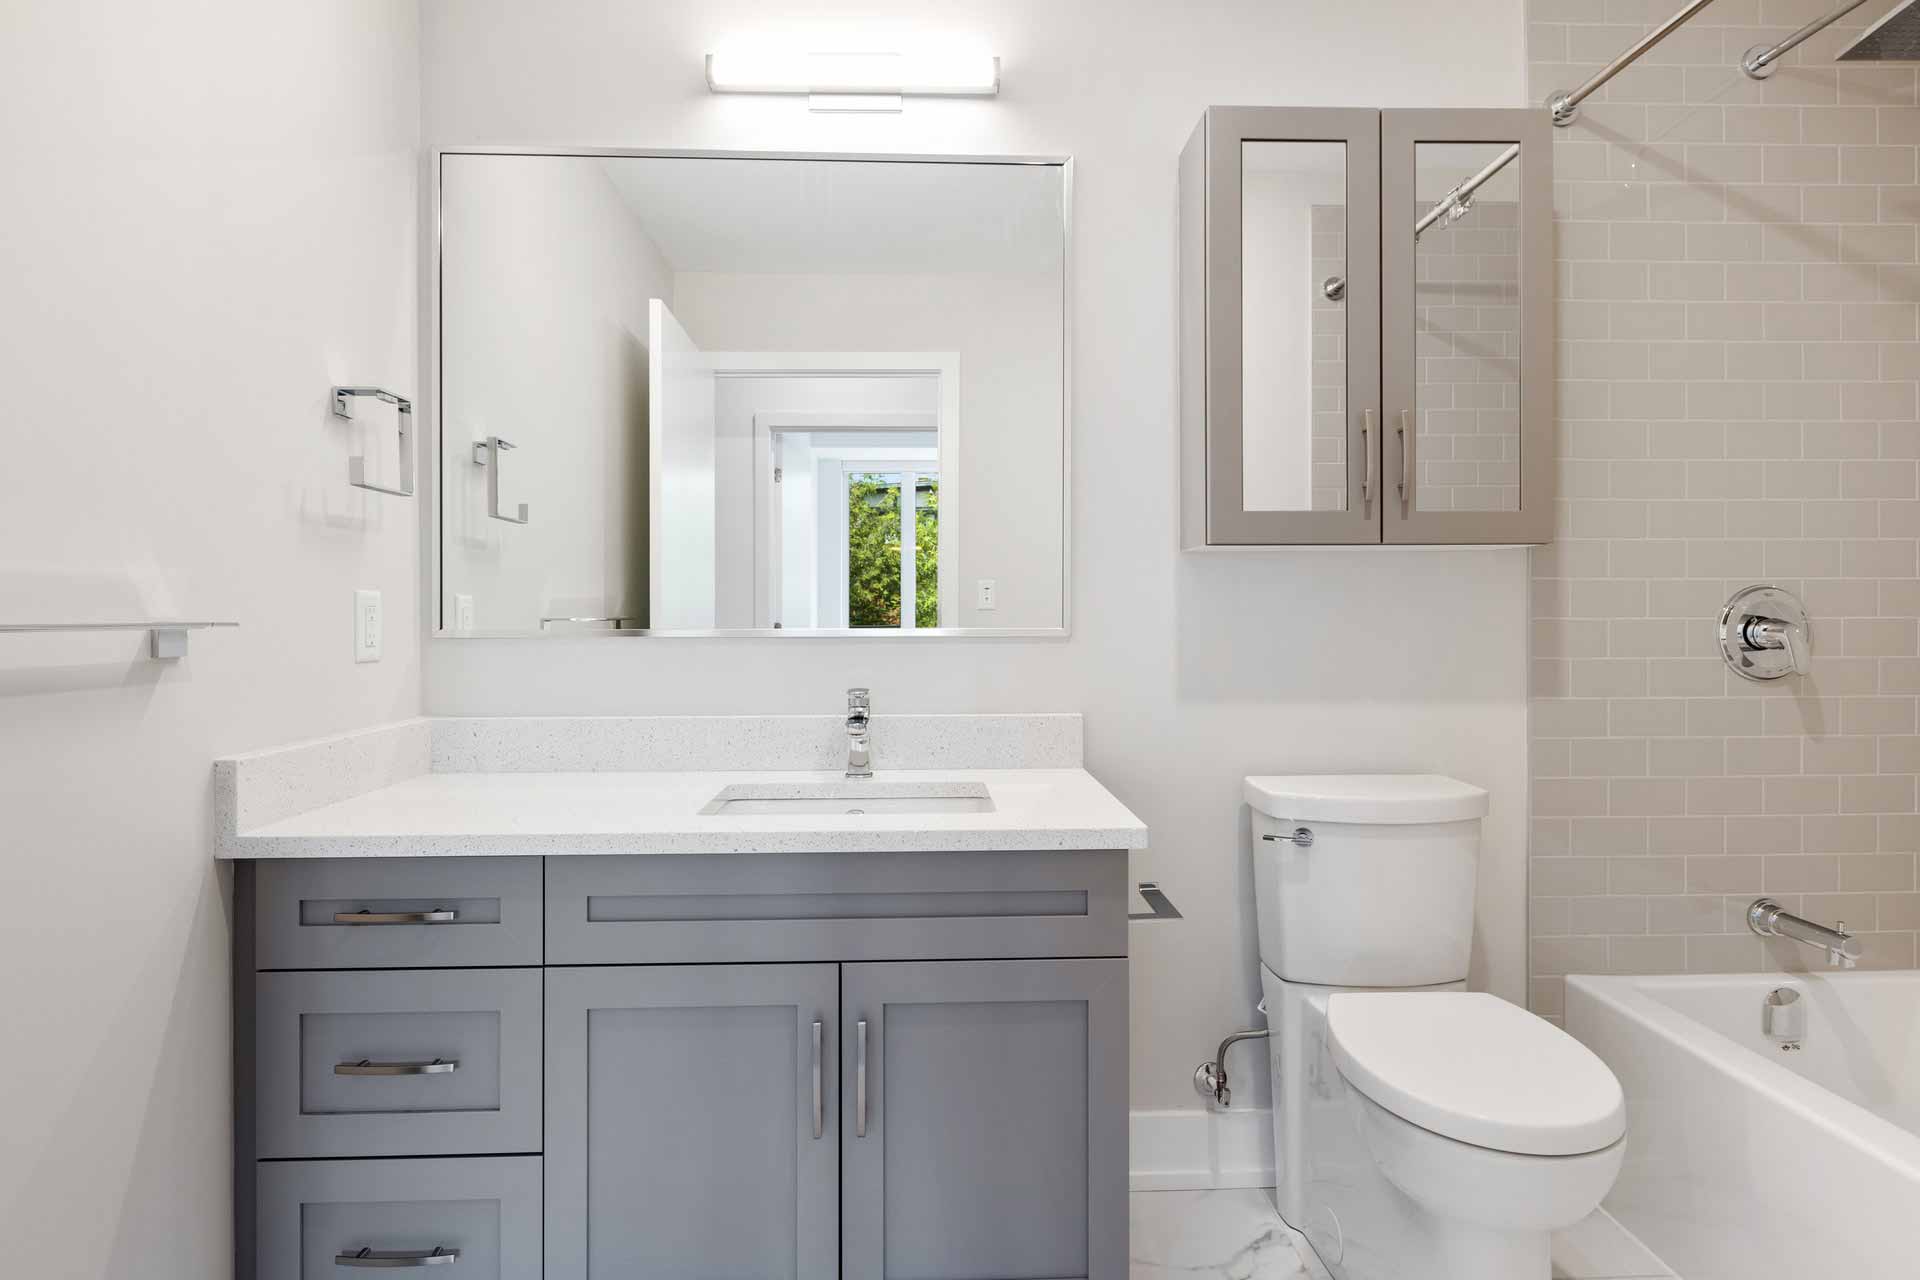 A clean, bright bathroom with light grey tiles